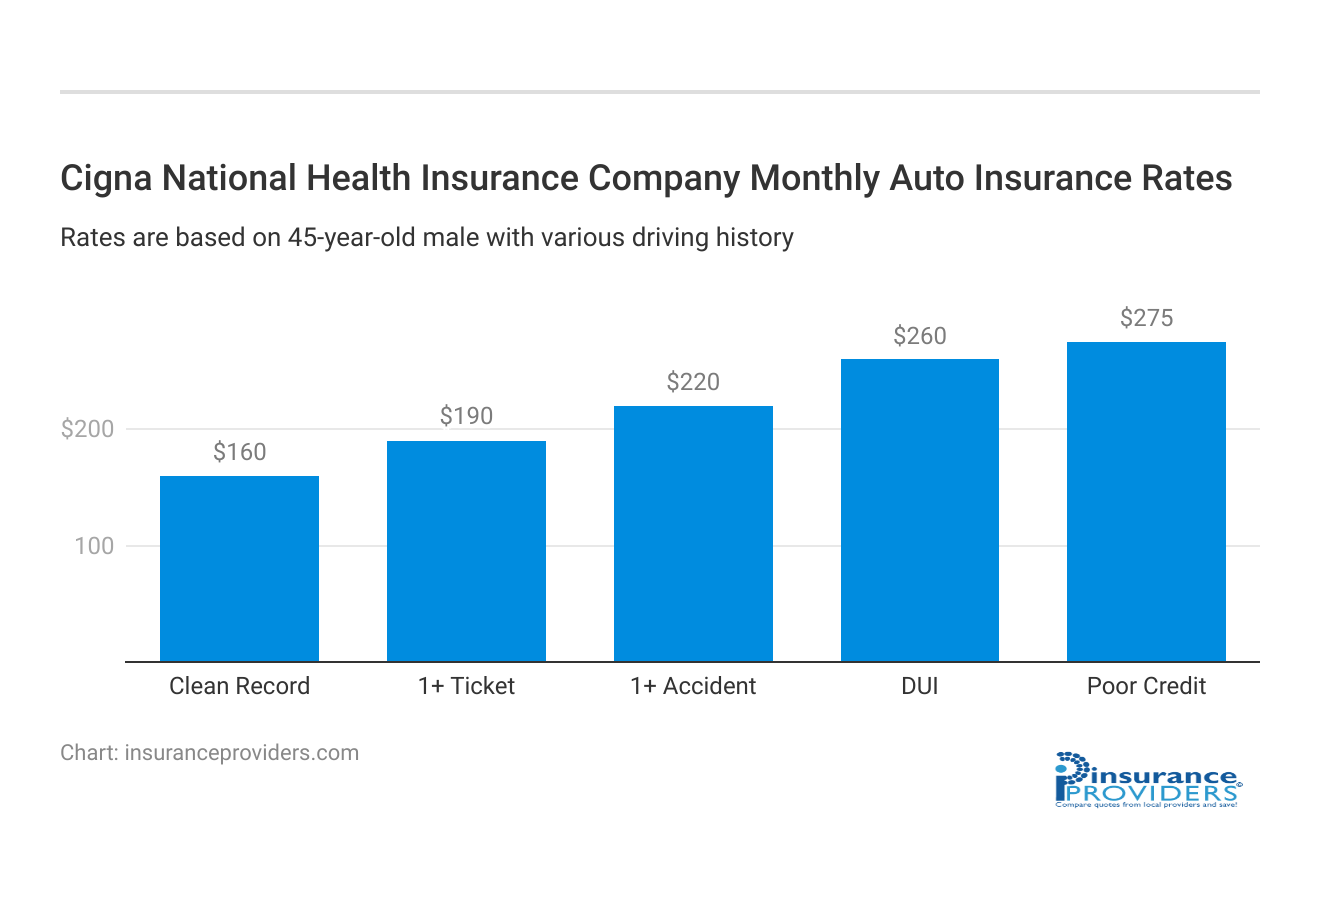 <h3>Cigna National Health Insurance Company Monthly Auto Insurance Rates</h3>